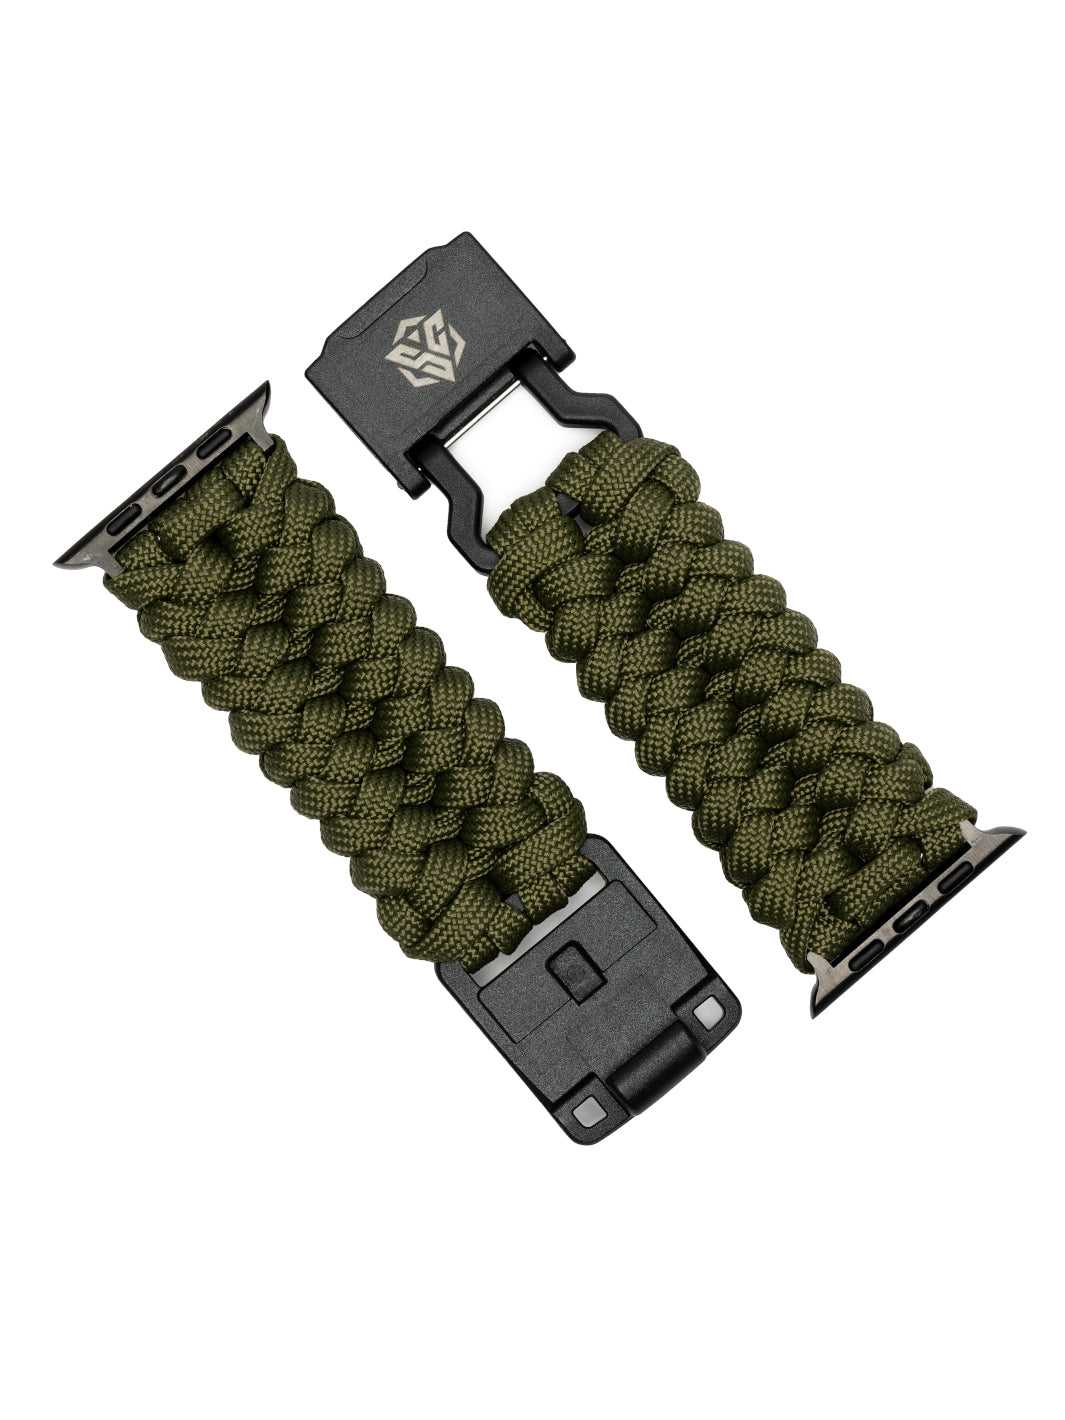 Strapcord Ribs Apple Watch Band Strap Article 003 Olive Drab 2 1065 x 1420